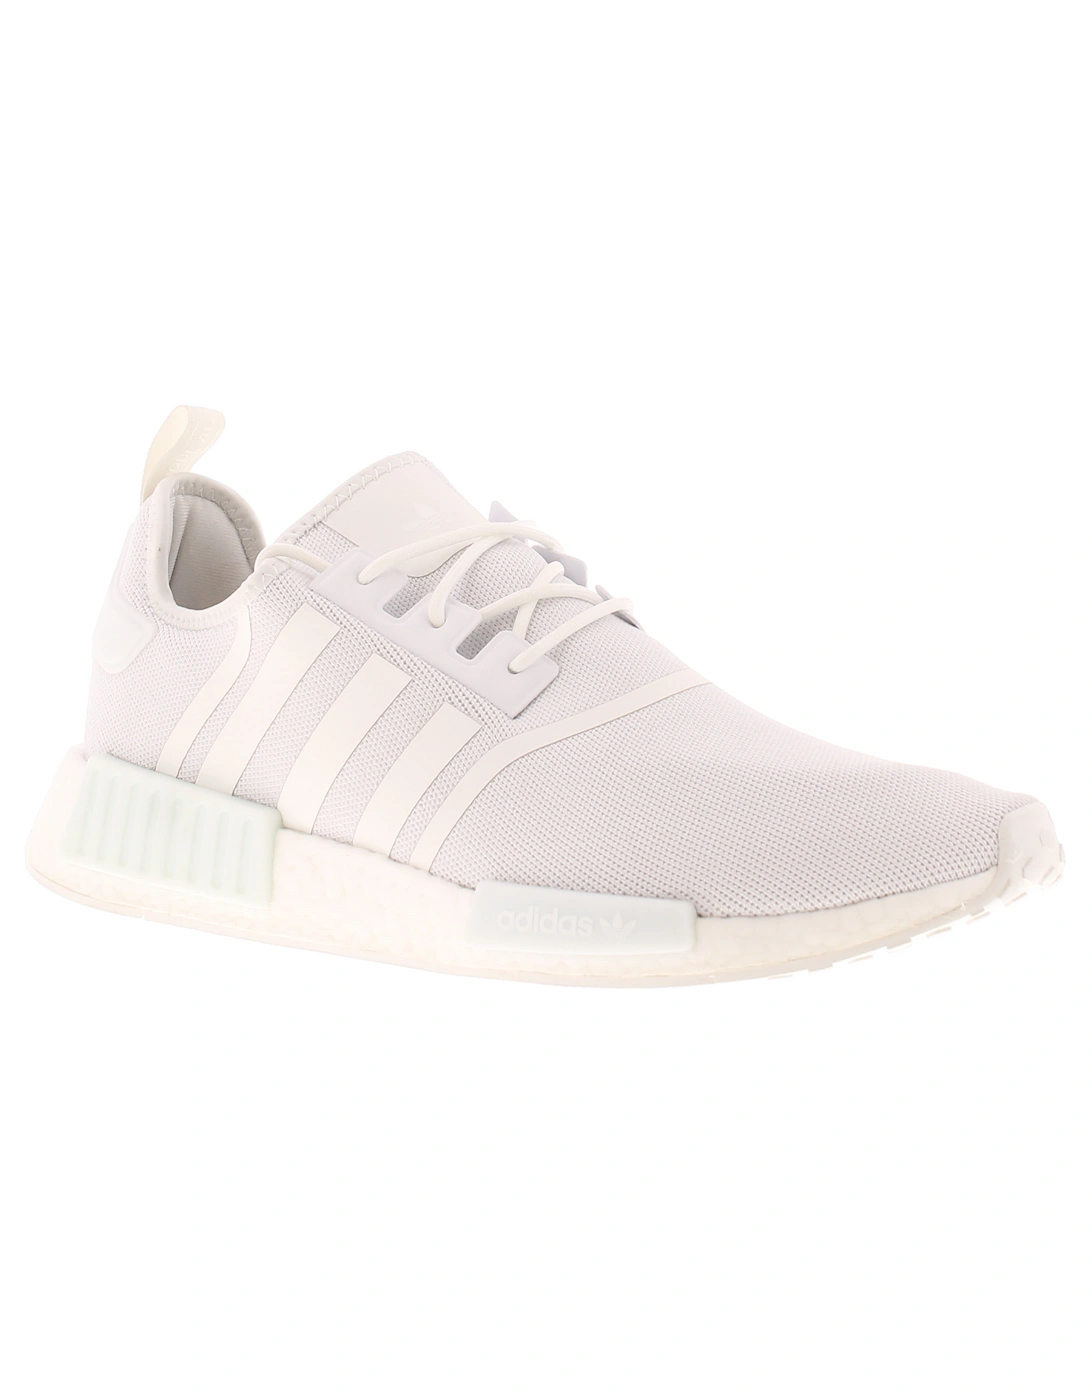 Adidas Originals Mens Trainers NMD R1 Lace Up white UK Size, 6 of 5